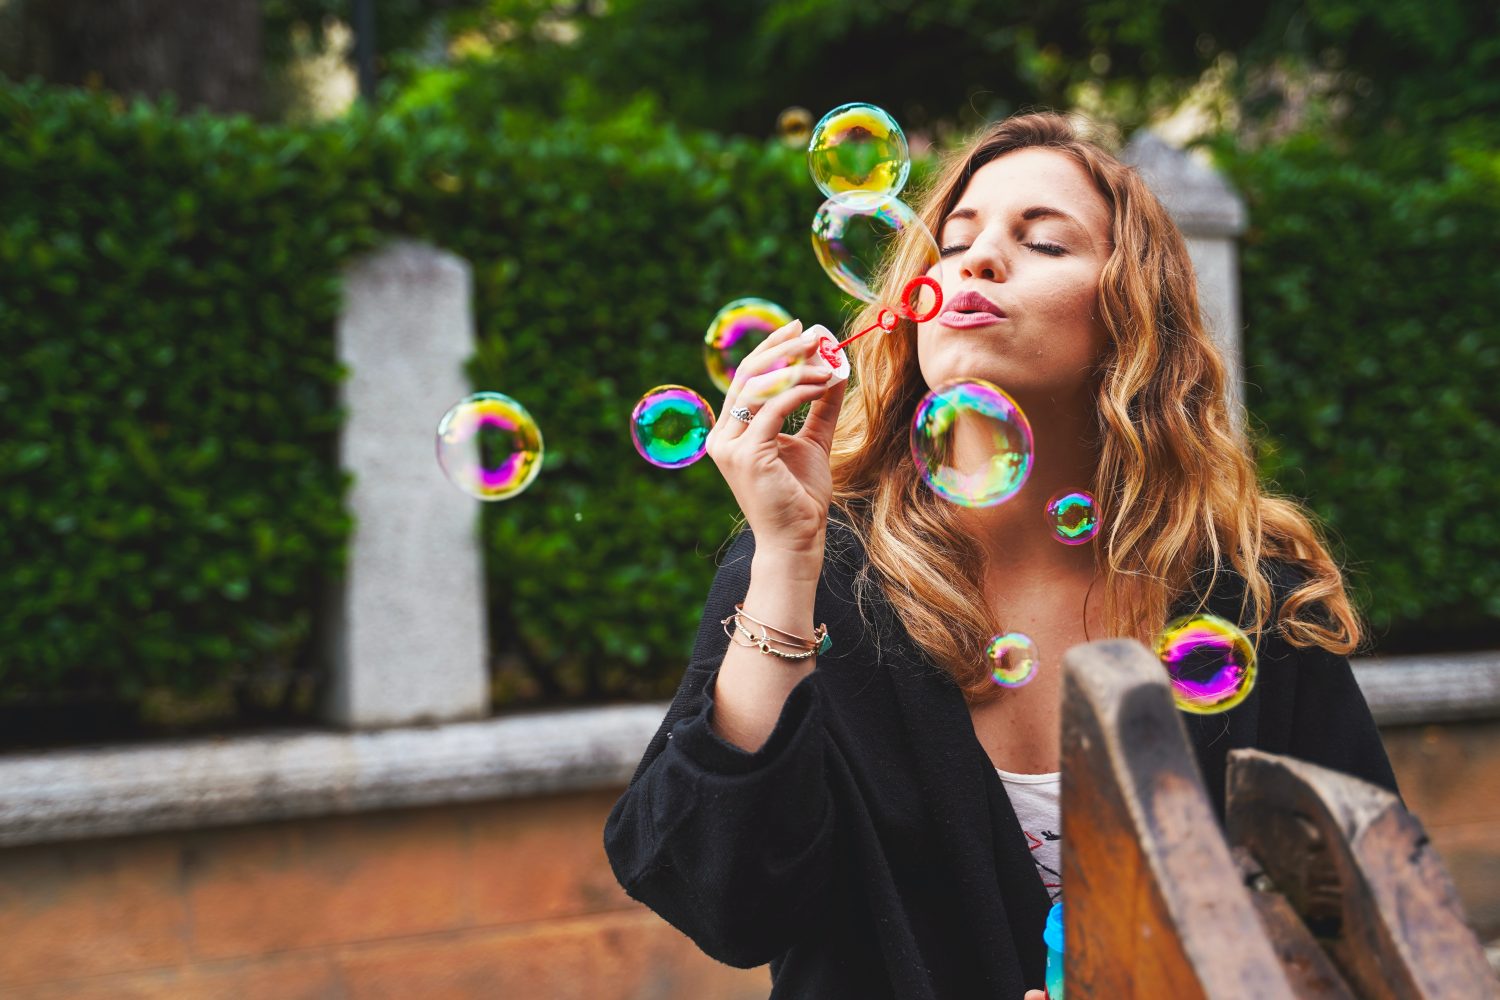 Forever Blowing Bubbles – How this downturn will impact investing in tech startups